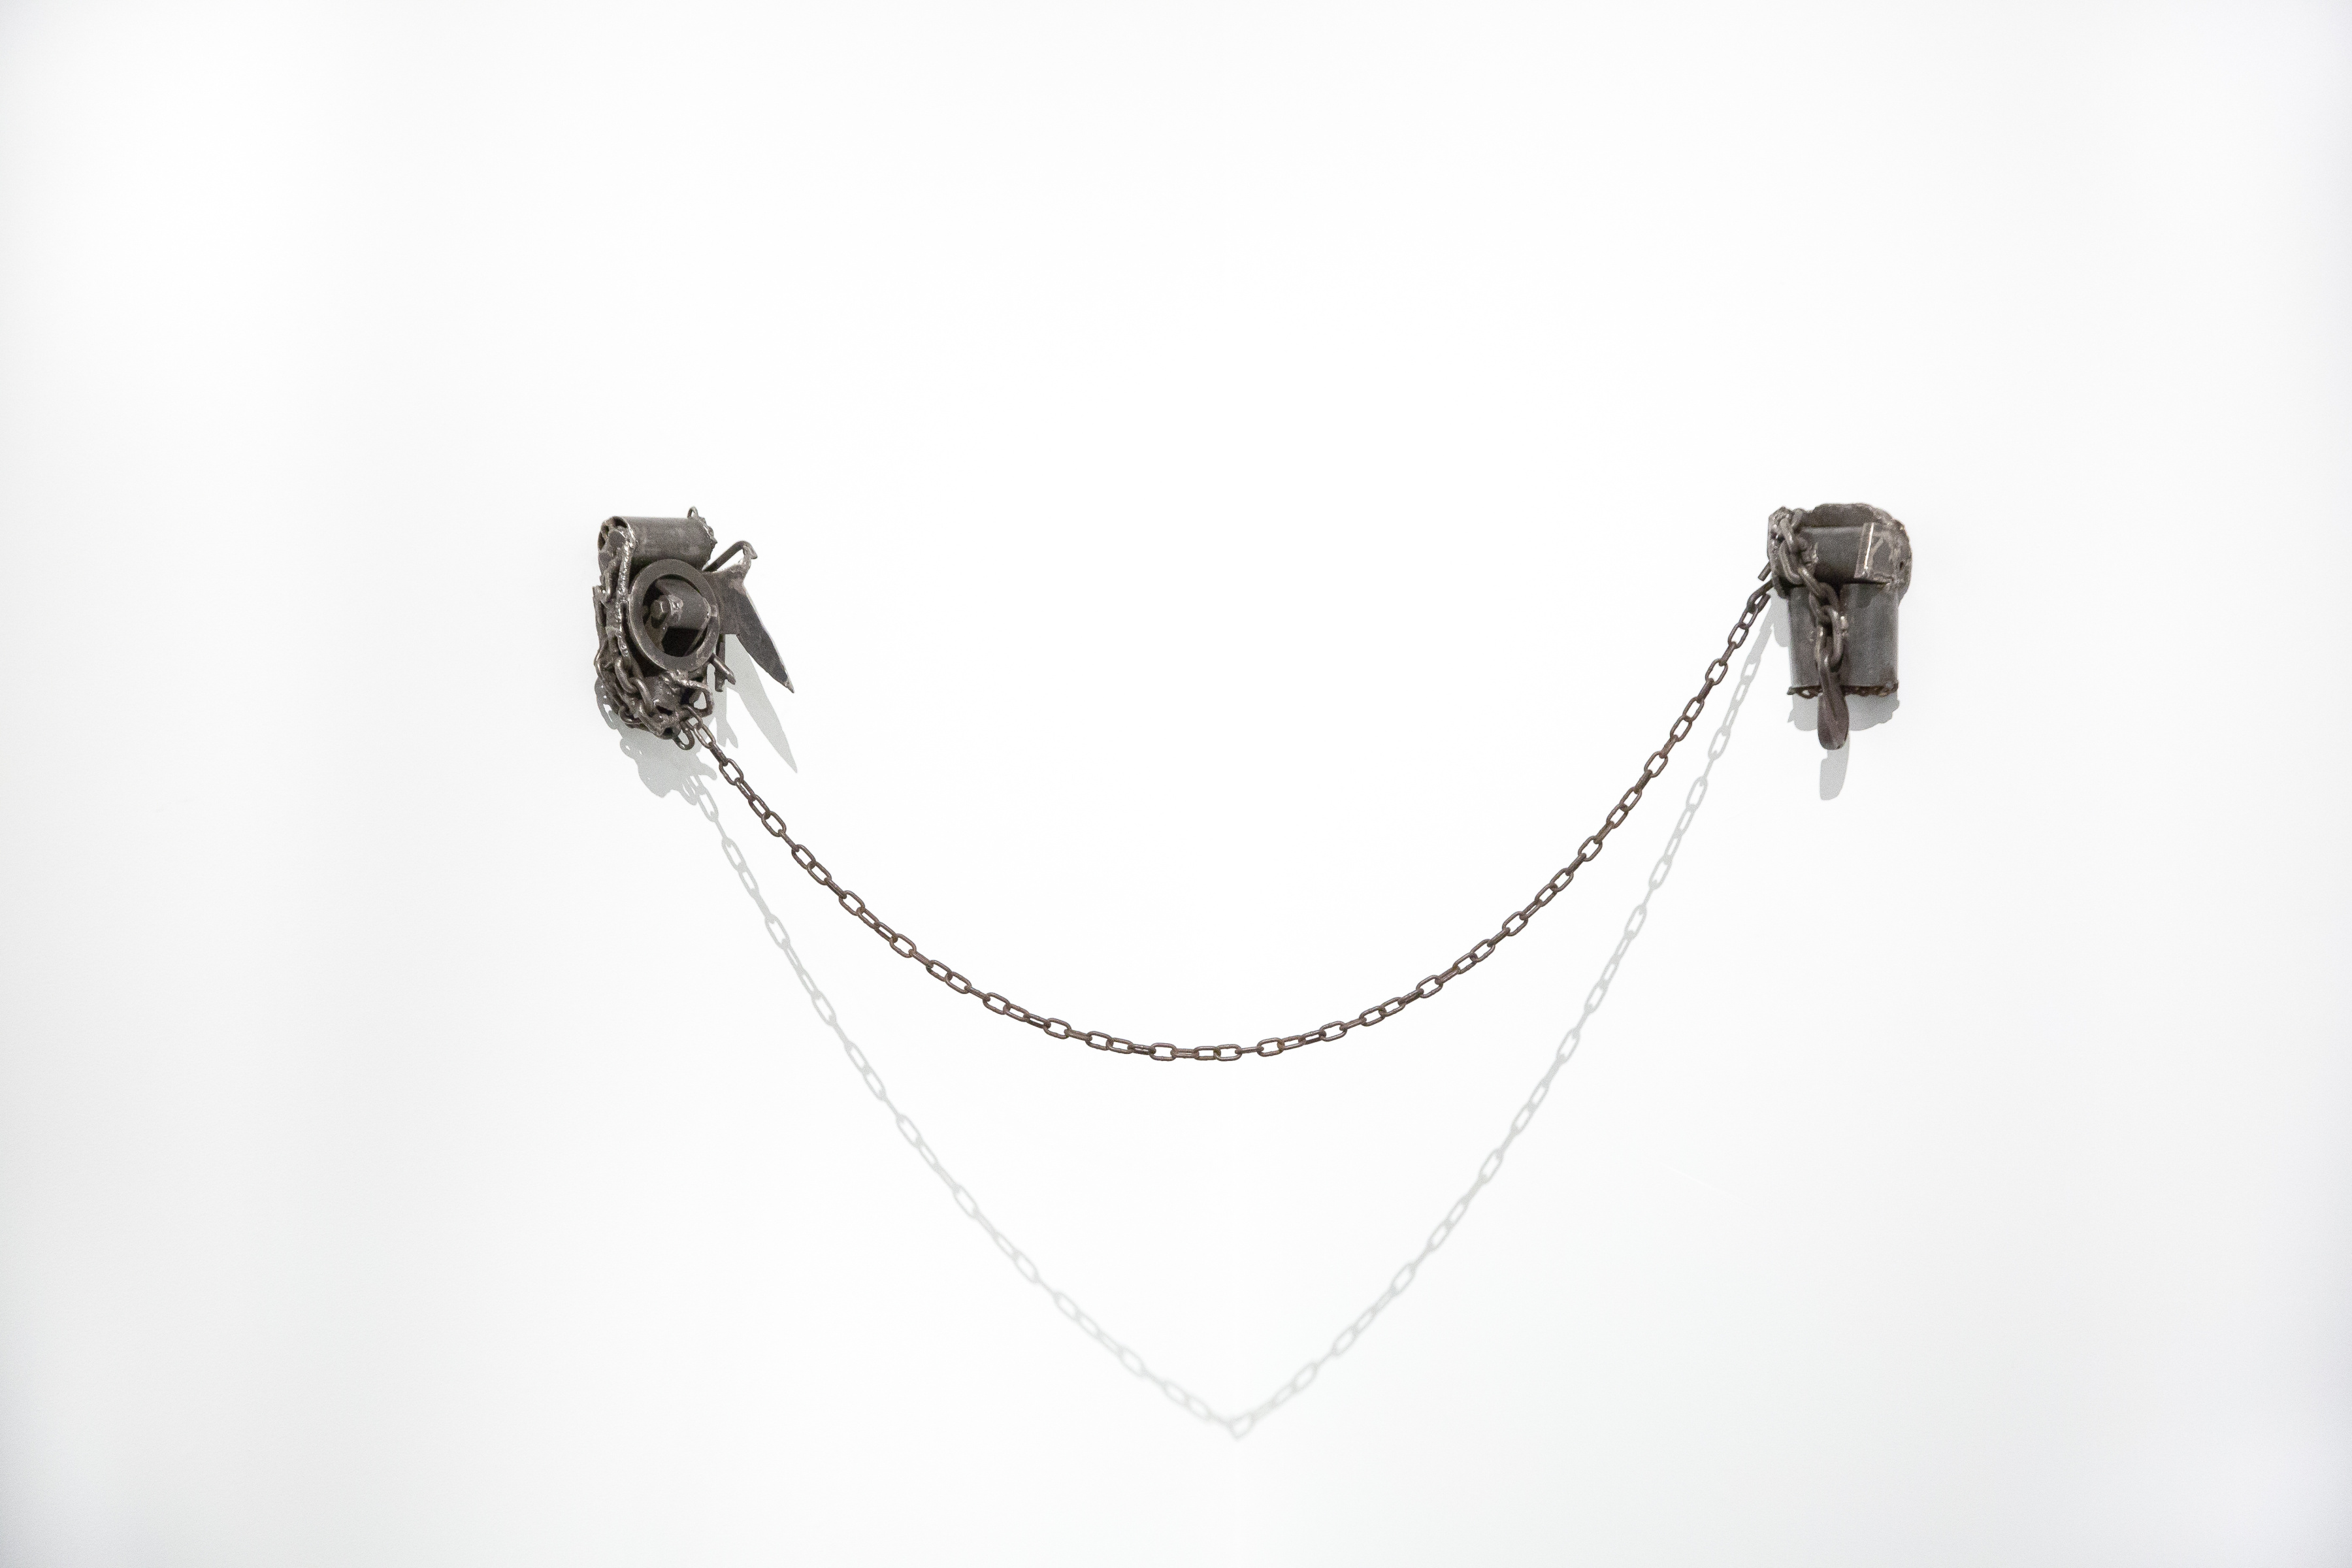 Two is One, 2016, welded steel and chain, dimensions variable